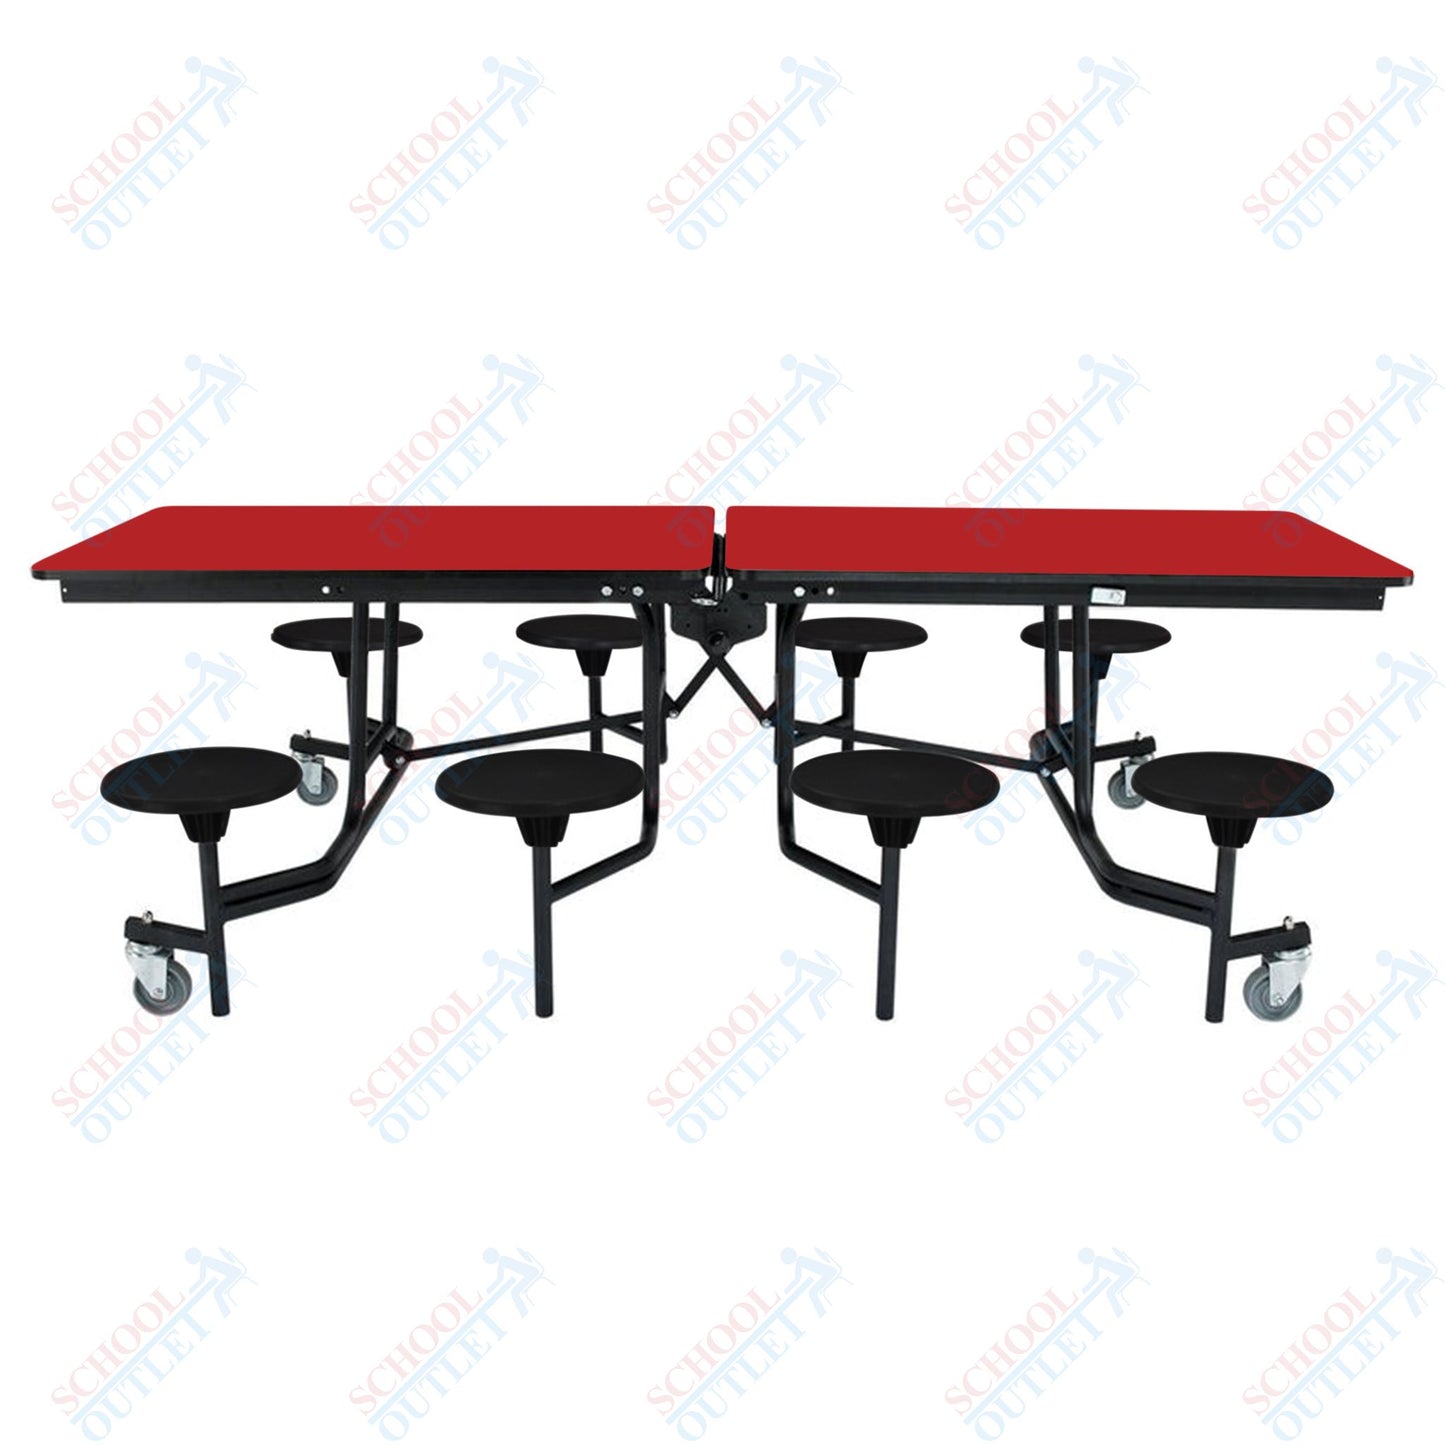 NPS Mobile Cafeteria Table - 30" W x 8' L - 8 Stools - MDF Core - Protect Edge - Chrome Frame